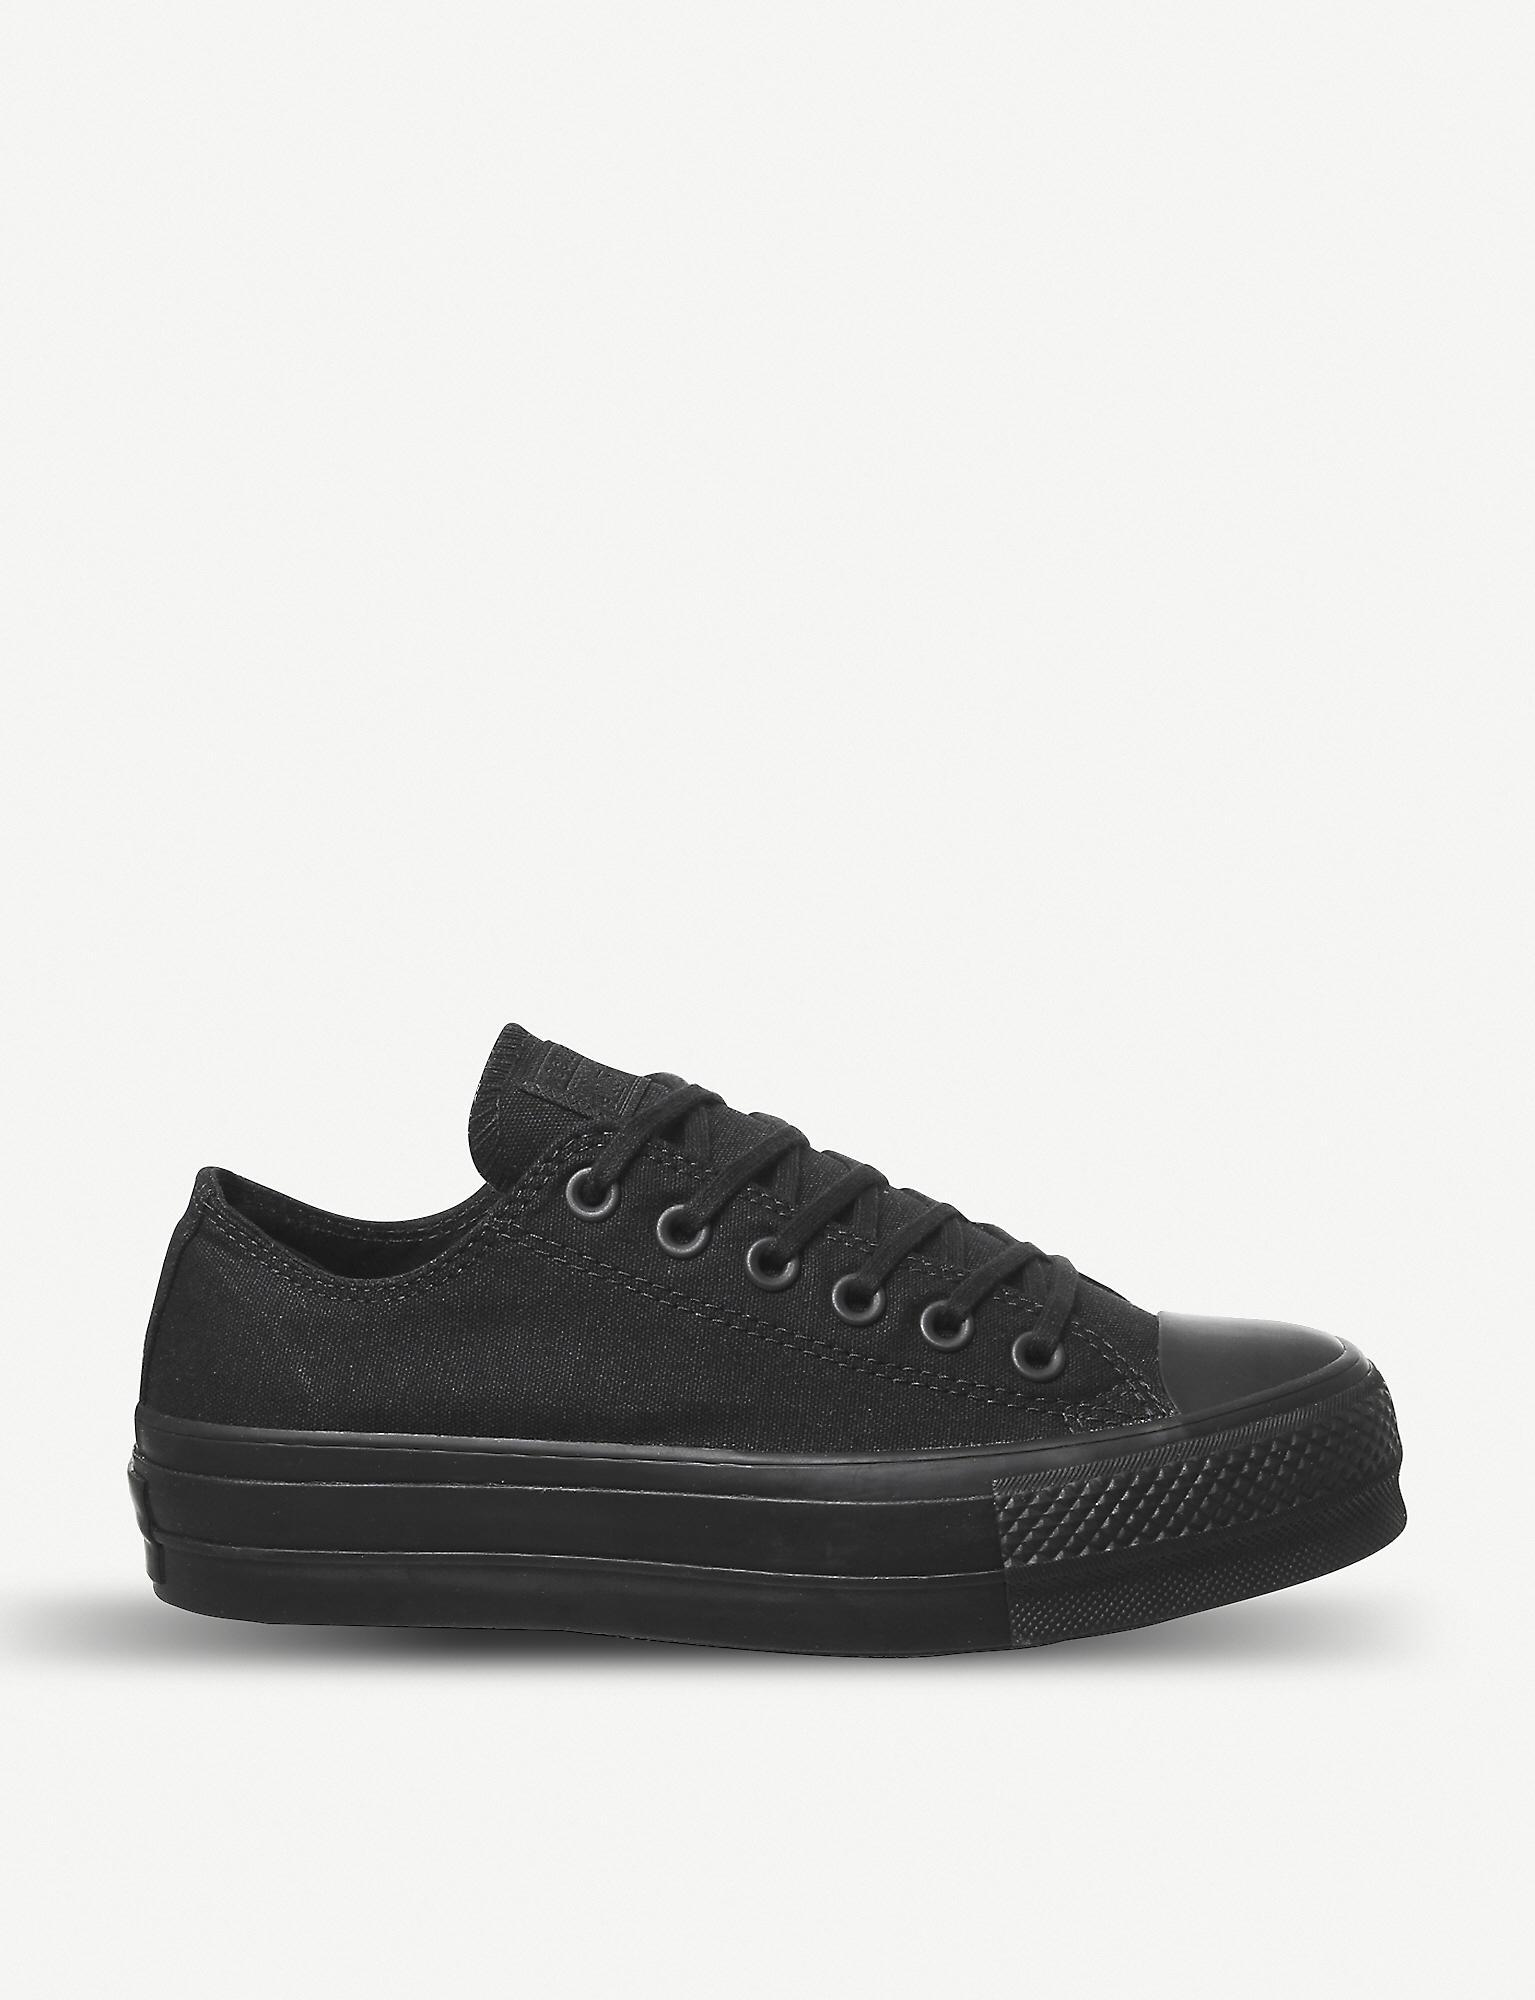 Converse All Star Low Platform Leather Trainers in Black - Lyst